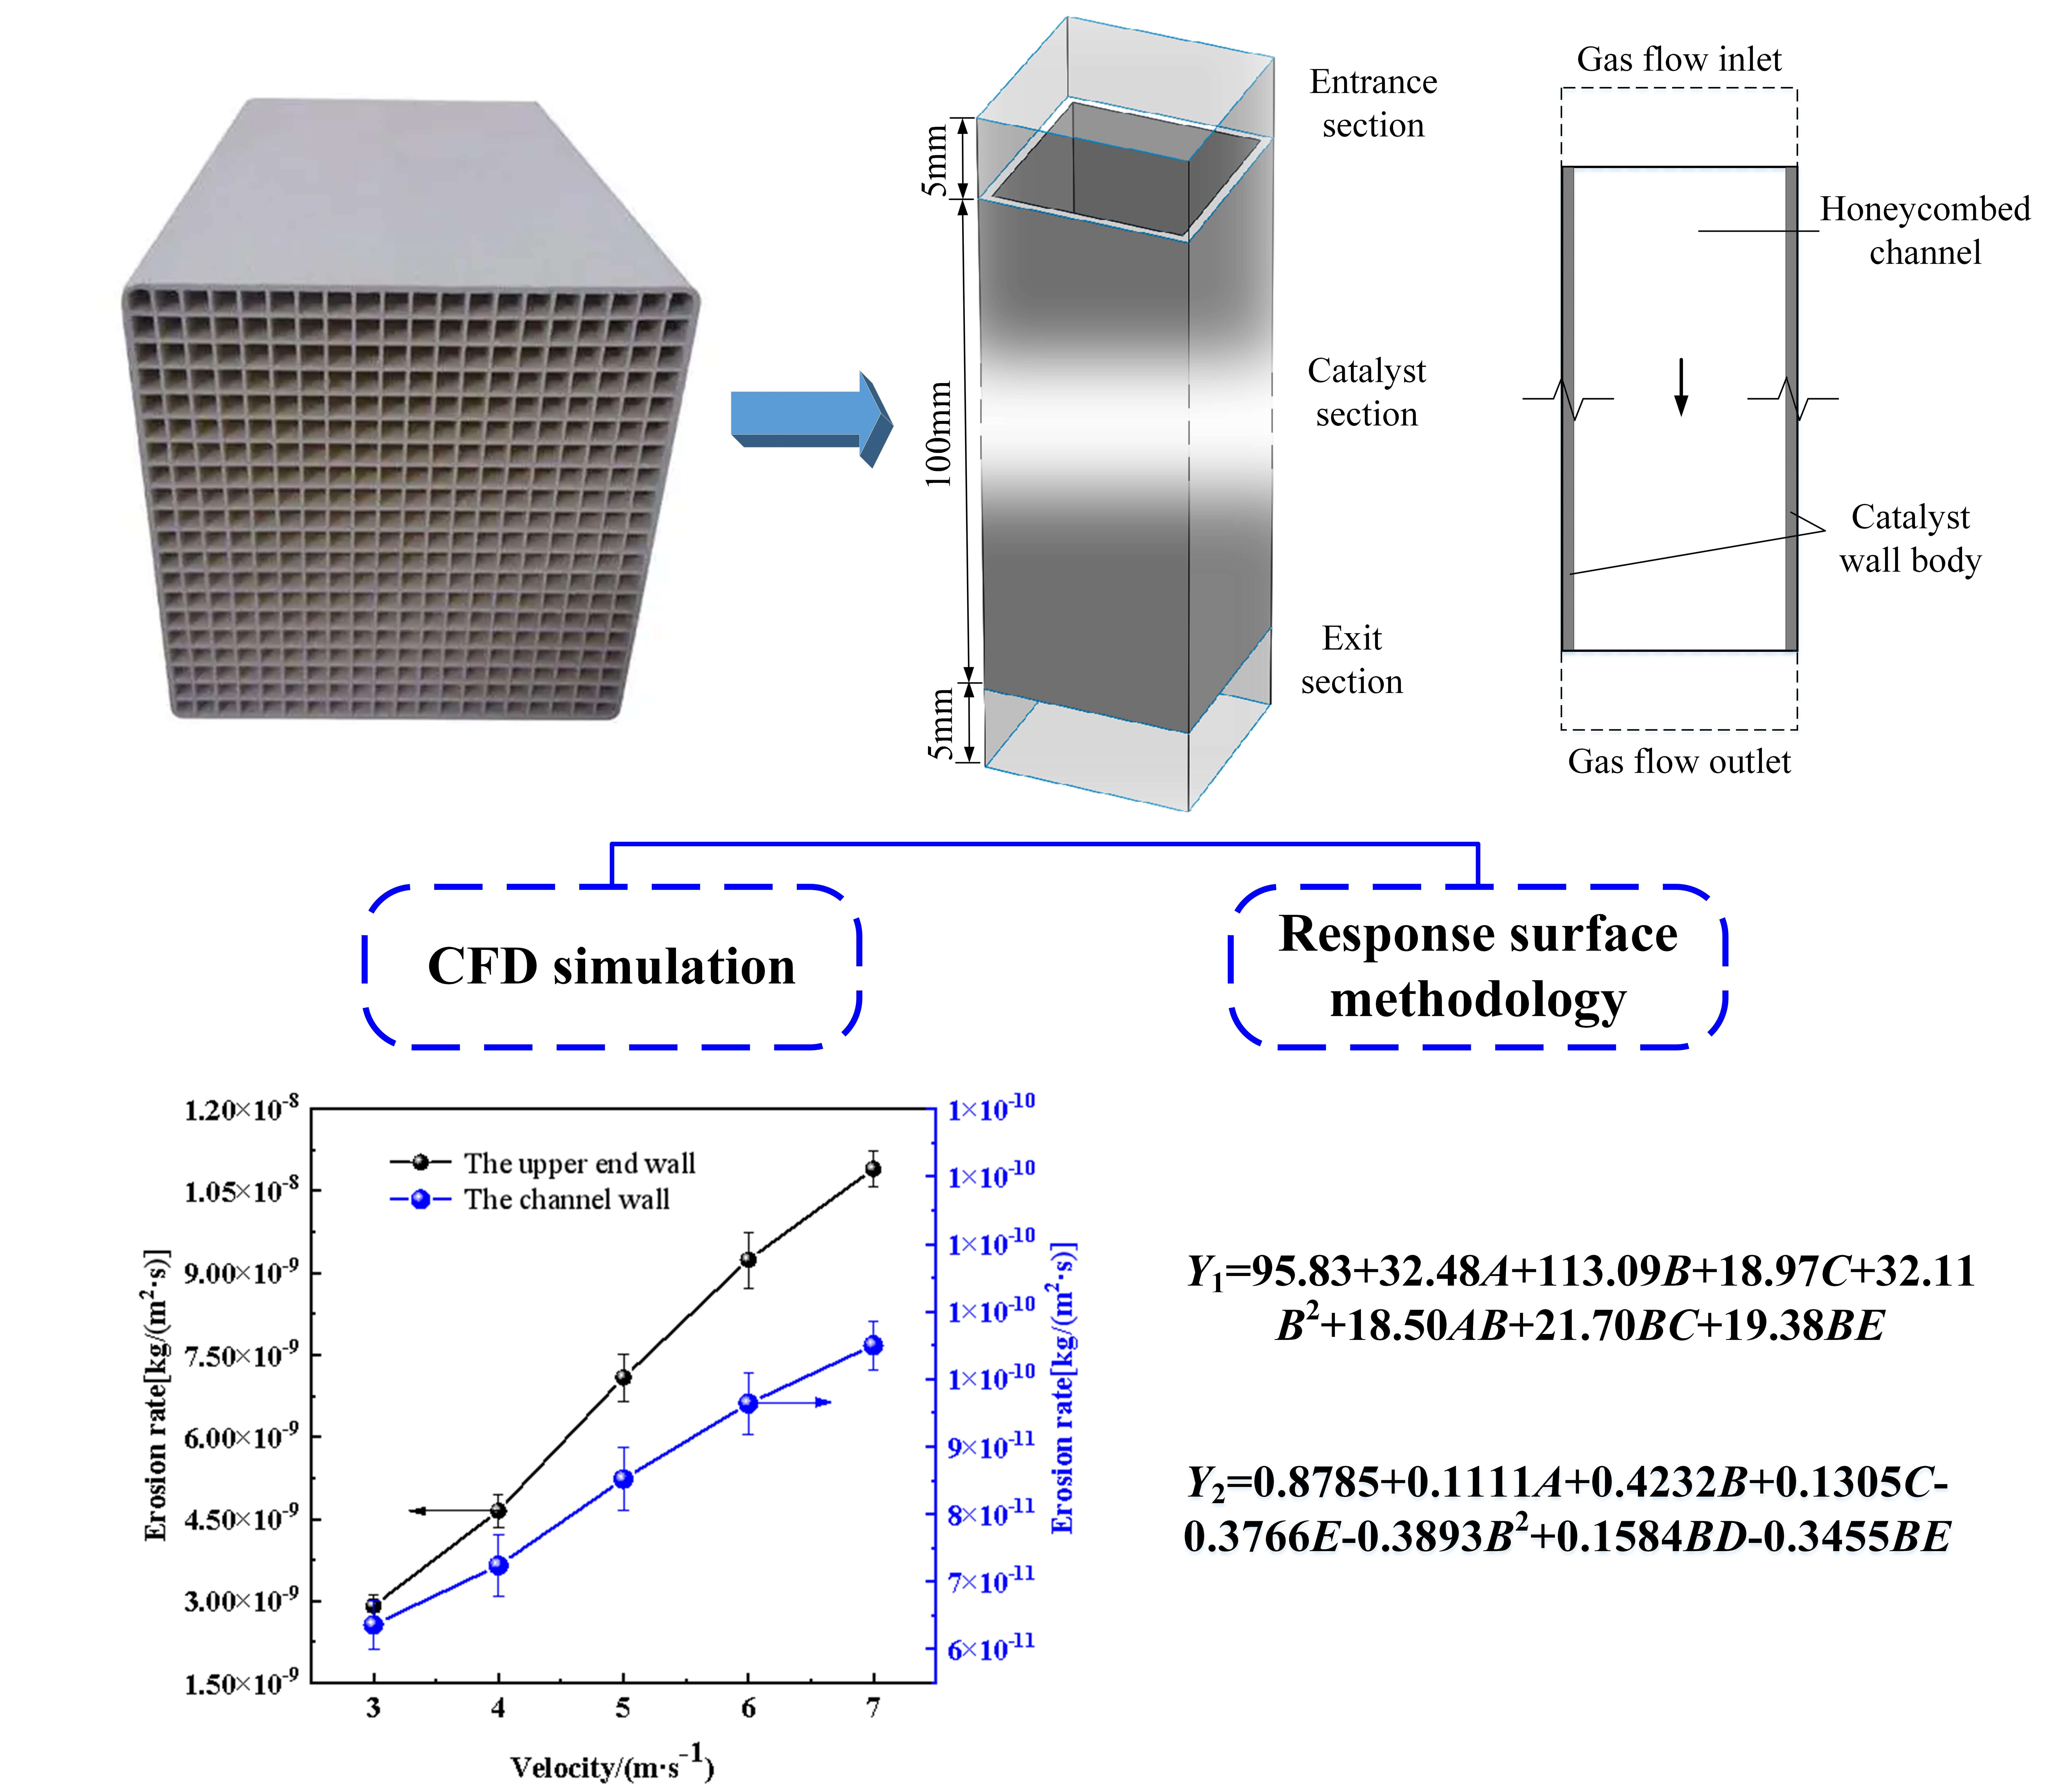 A Model for Predicting the Erosion Rate Induced by the Use of a Selective Catalytic Reduction Denitrification Technology in Cement Kilns Flue Gas